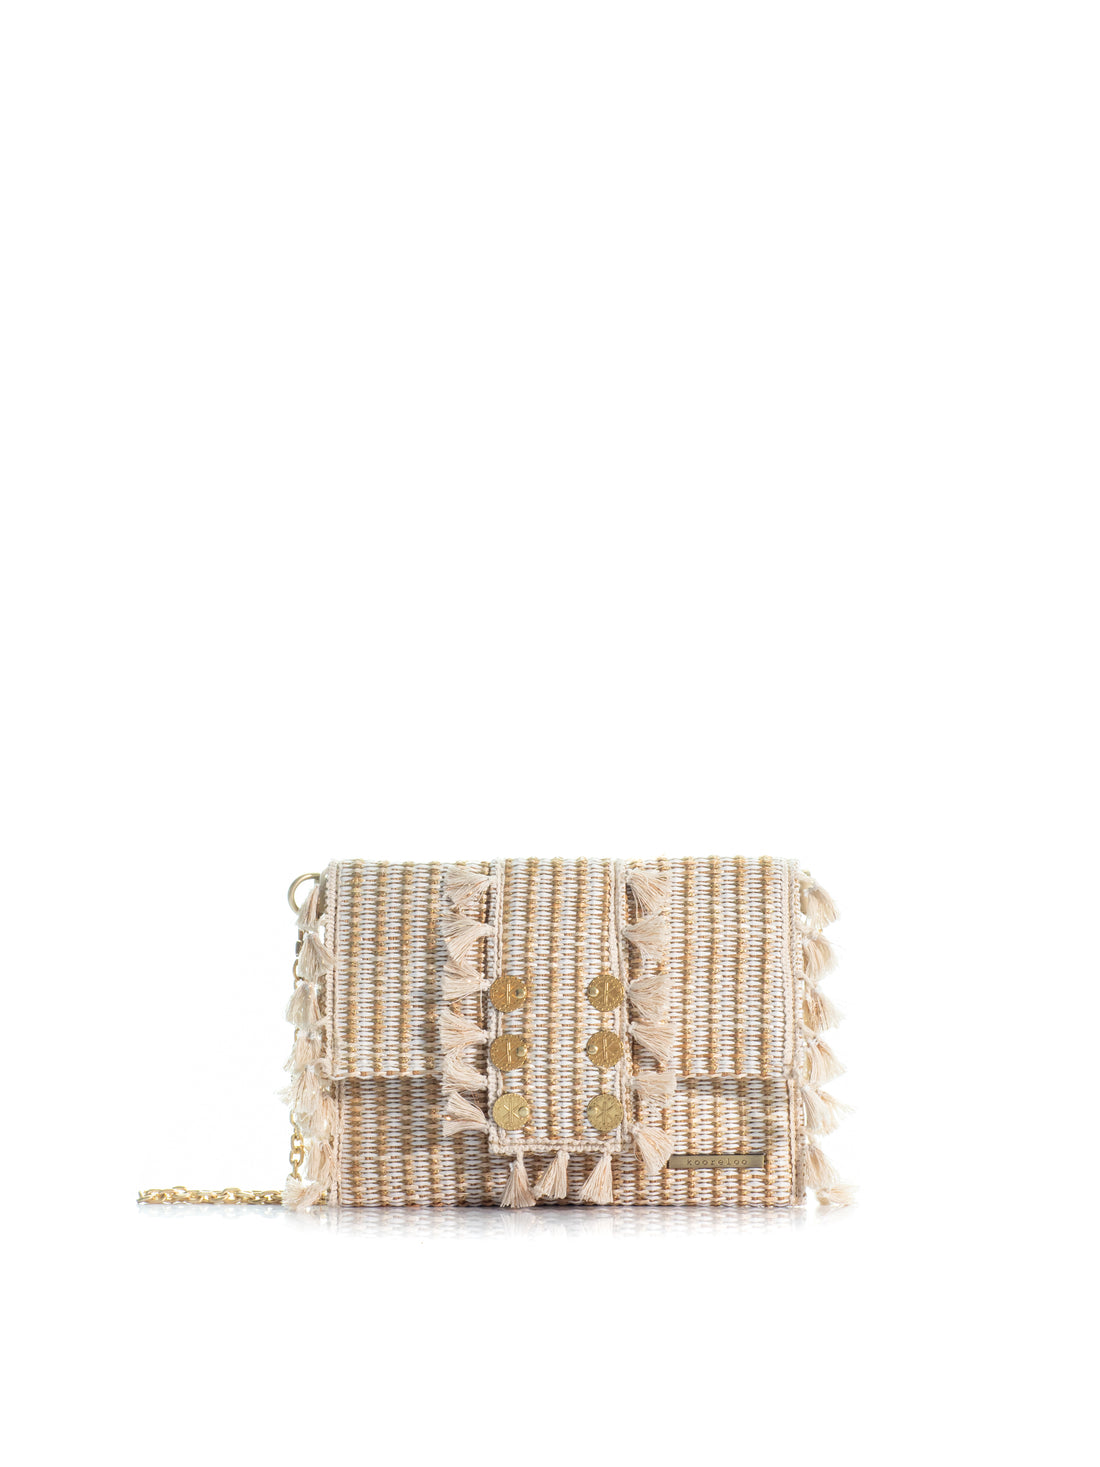 The New Yorker Clutch